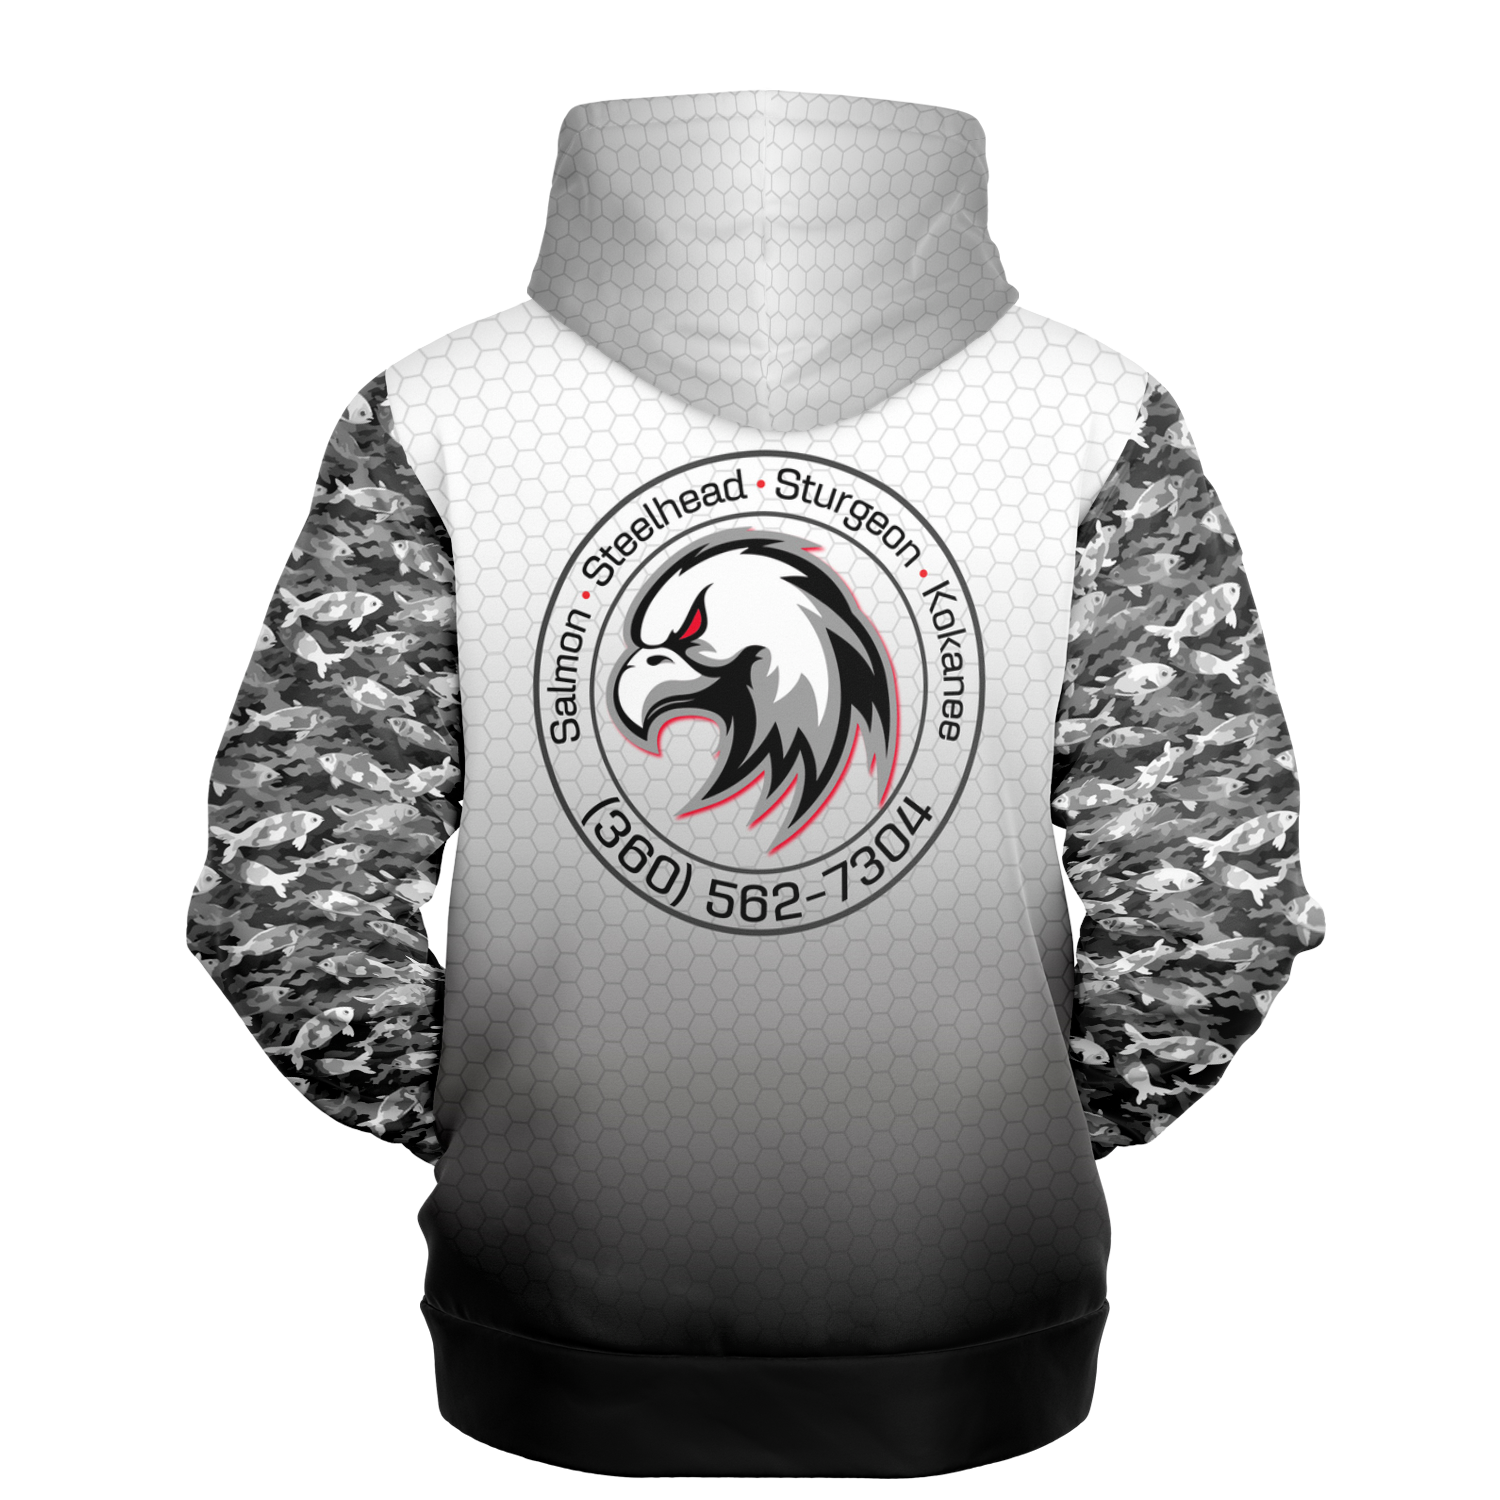 A digital rendering of a Full Tilt Outdoors - Angry Eagle - Tri-Blend Hoodie featuring a gray camo design with a hexagonal pattern on the lower half and the "full tilt boats" logo in red and black across the chest.